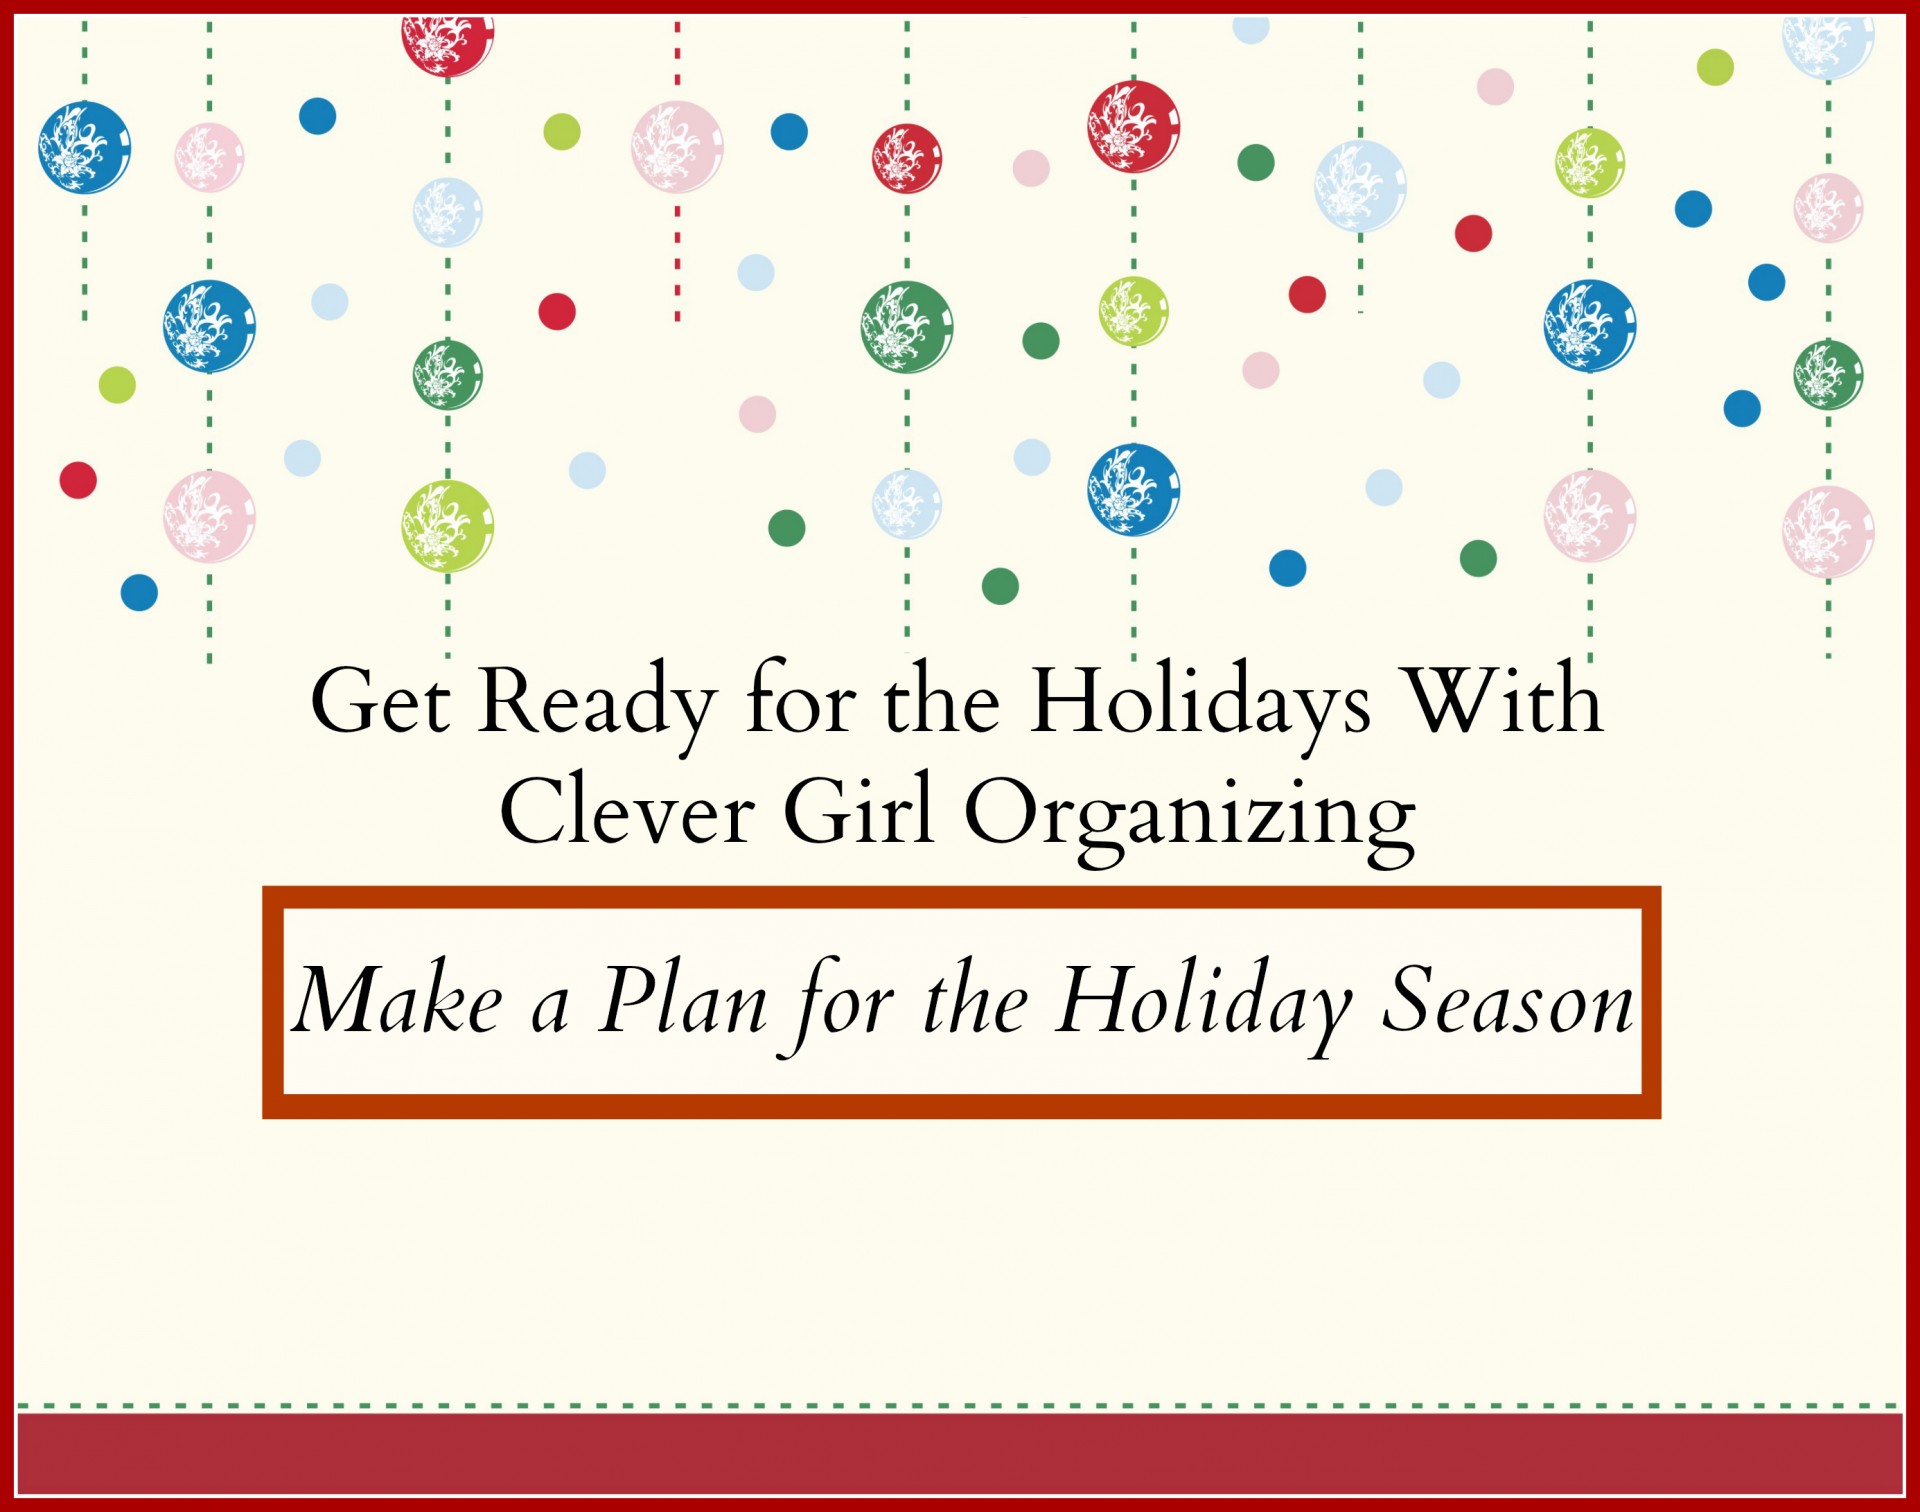 Get Ready for the Holidays: Create a Plan and Calendar for the Season